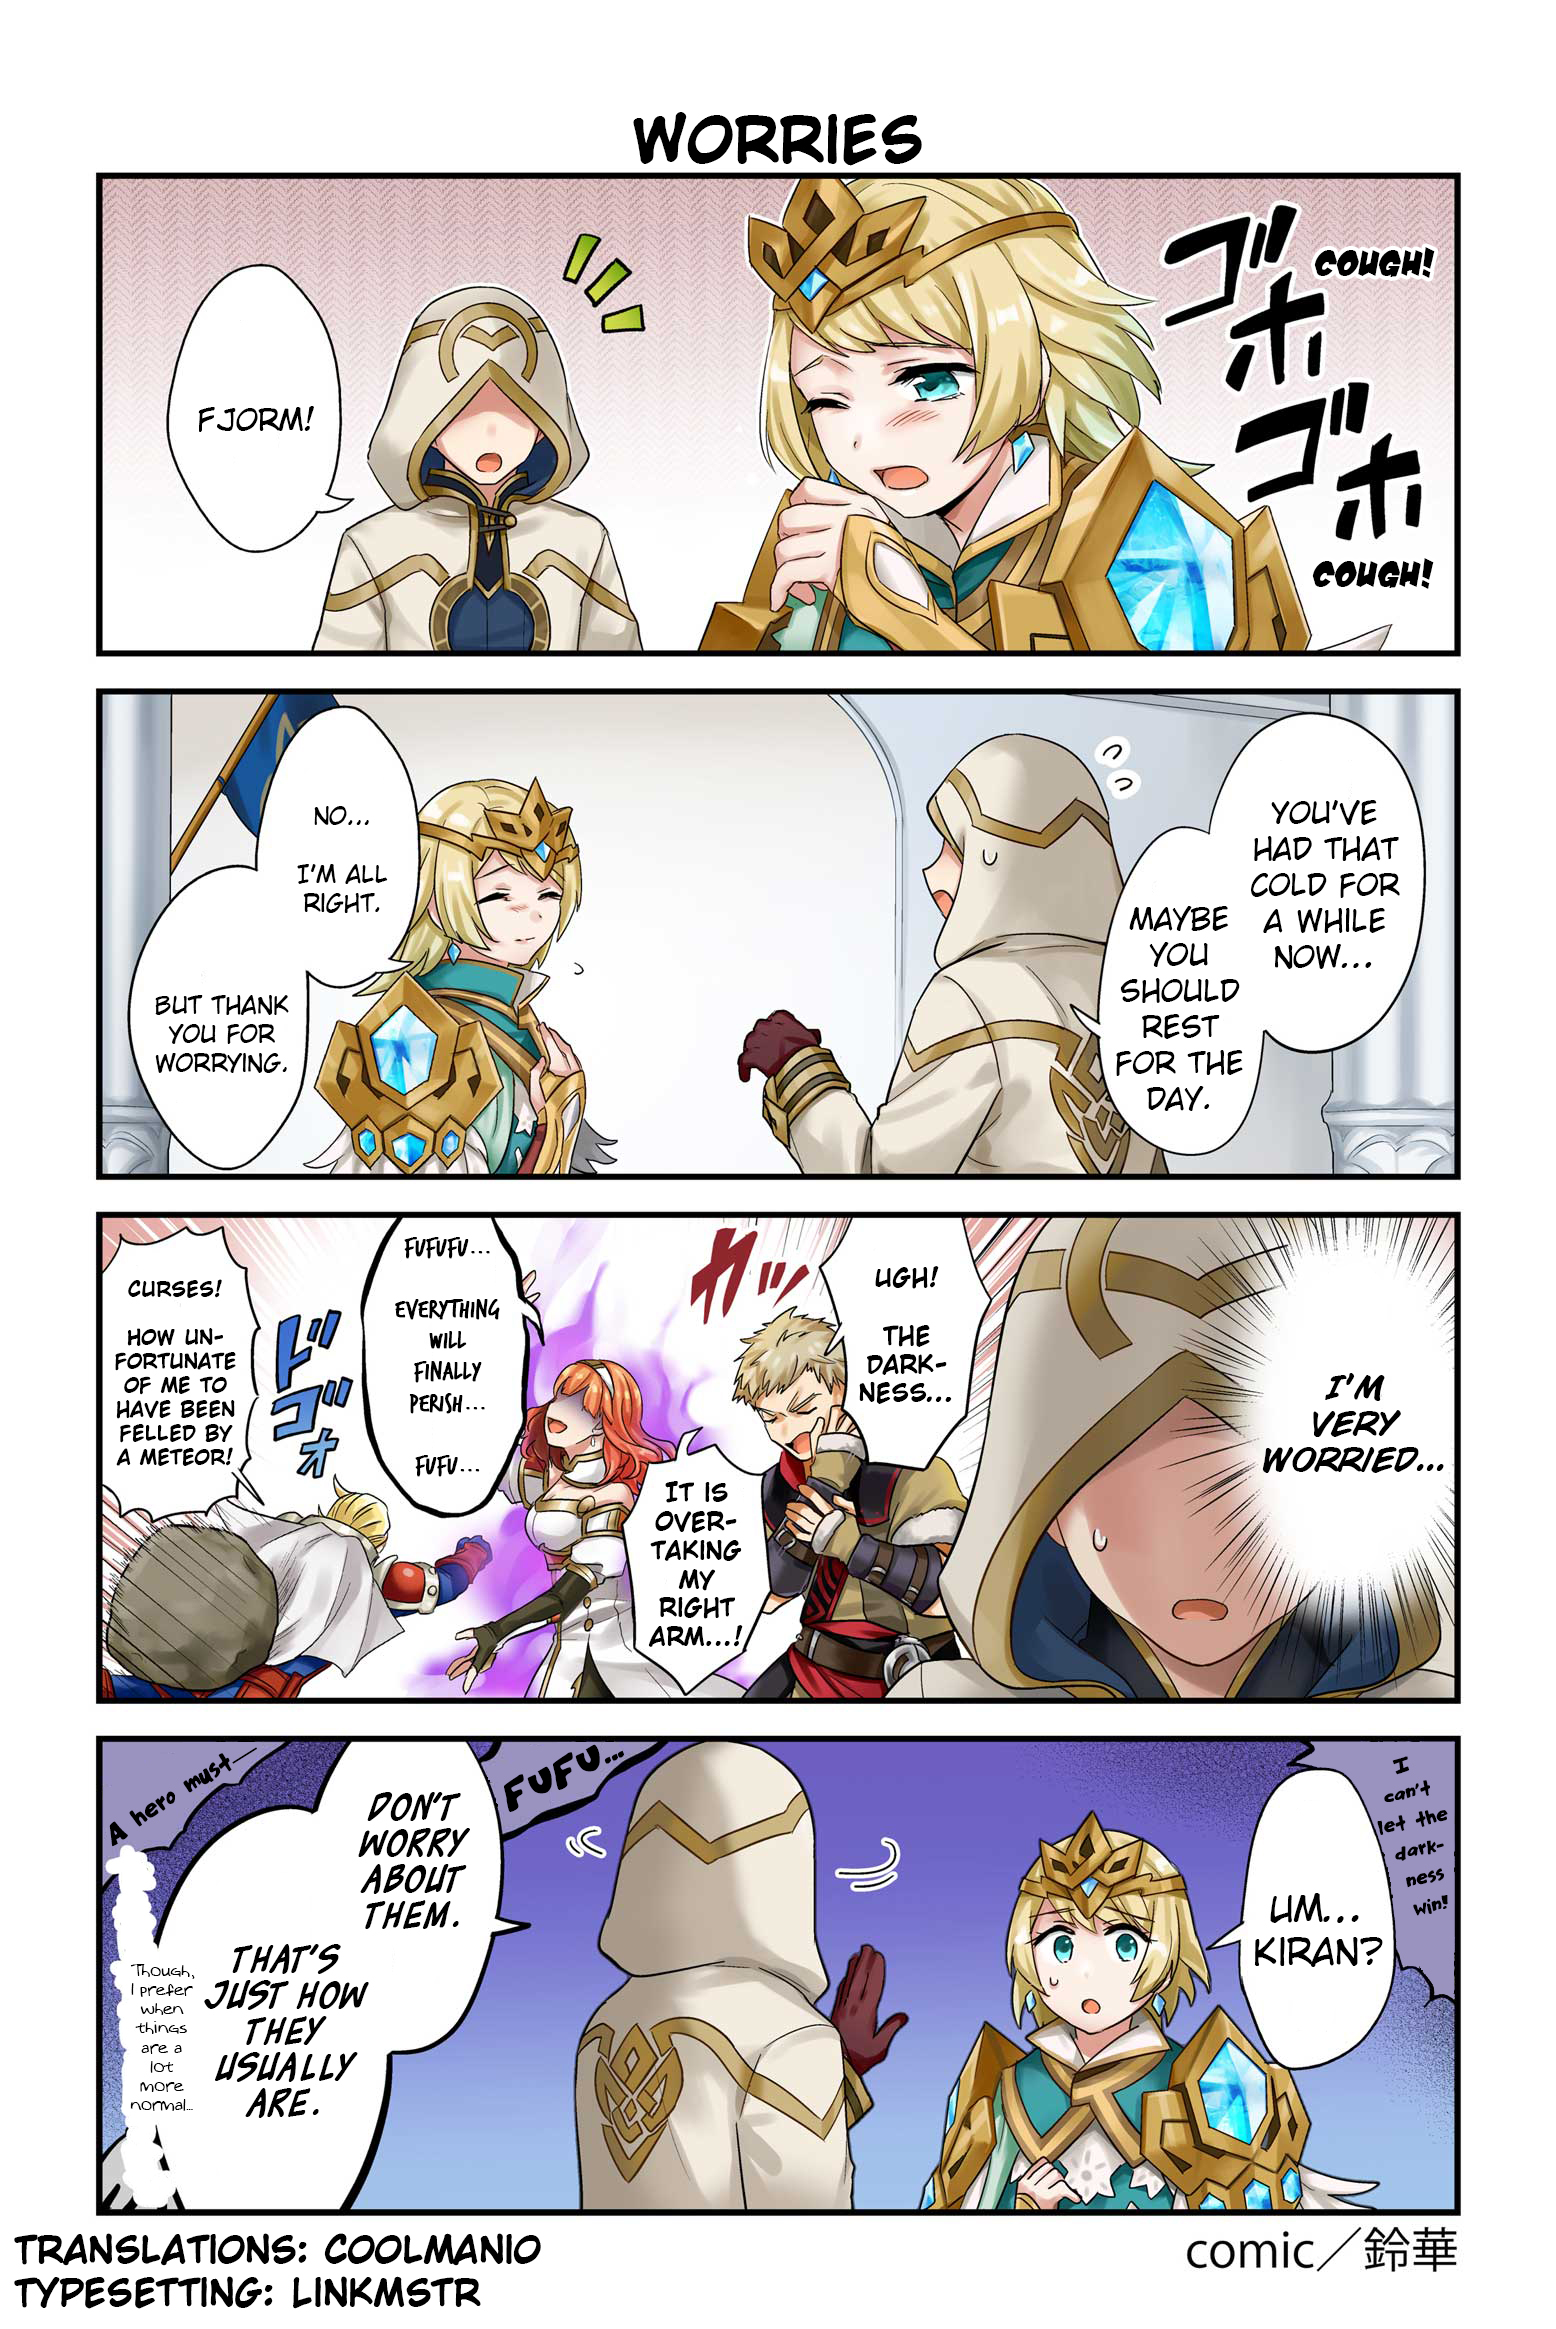 Fire Emblem Heroes Daily Lives of the Heroes Chapter 65: Worries